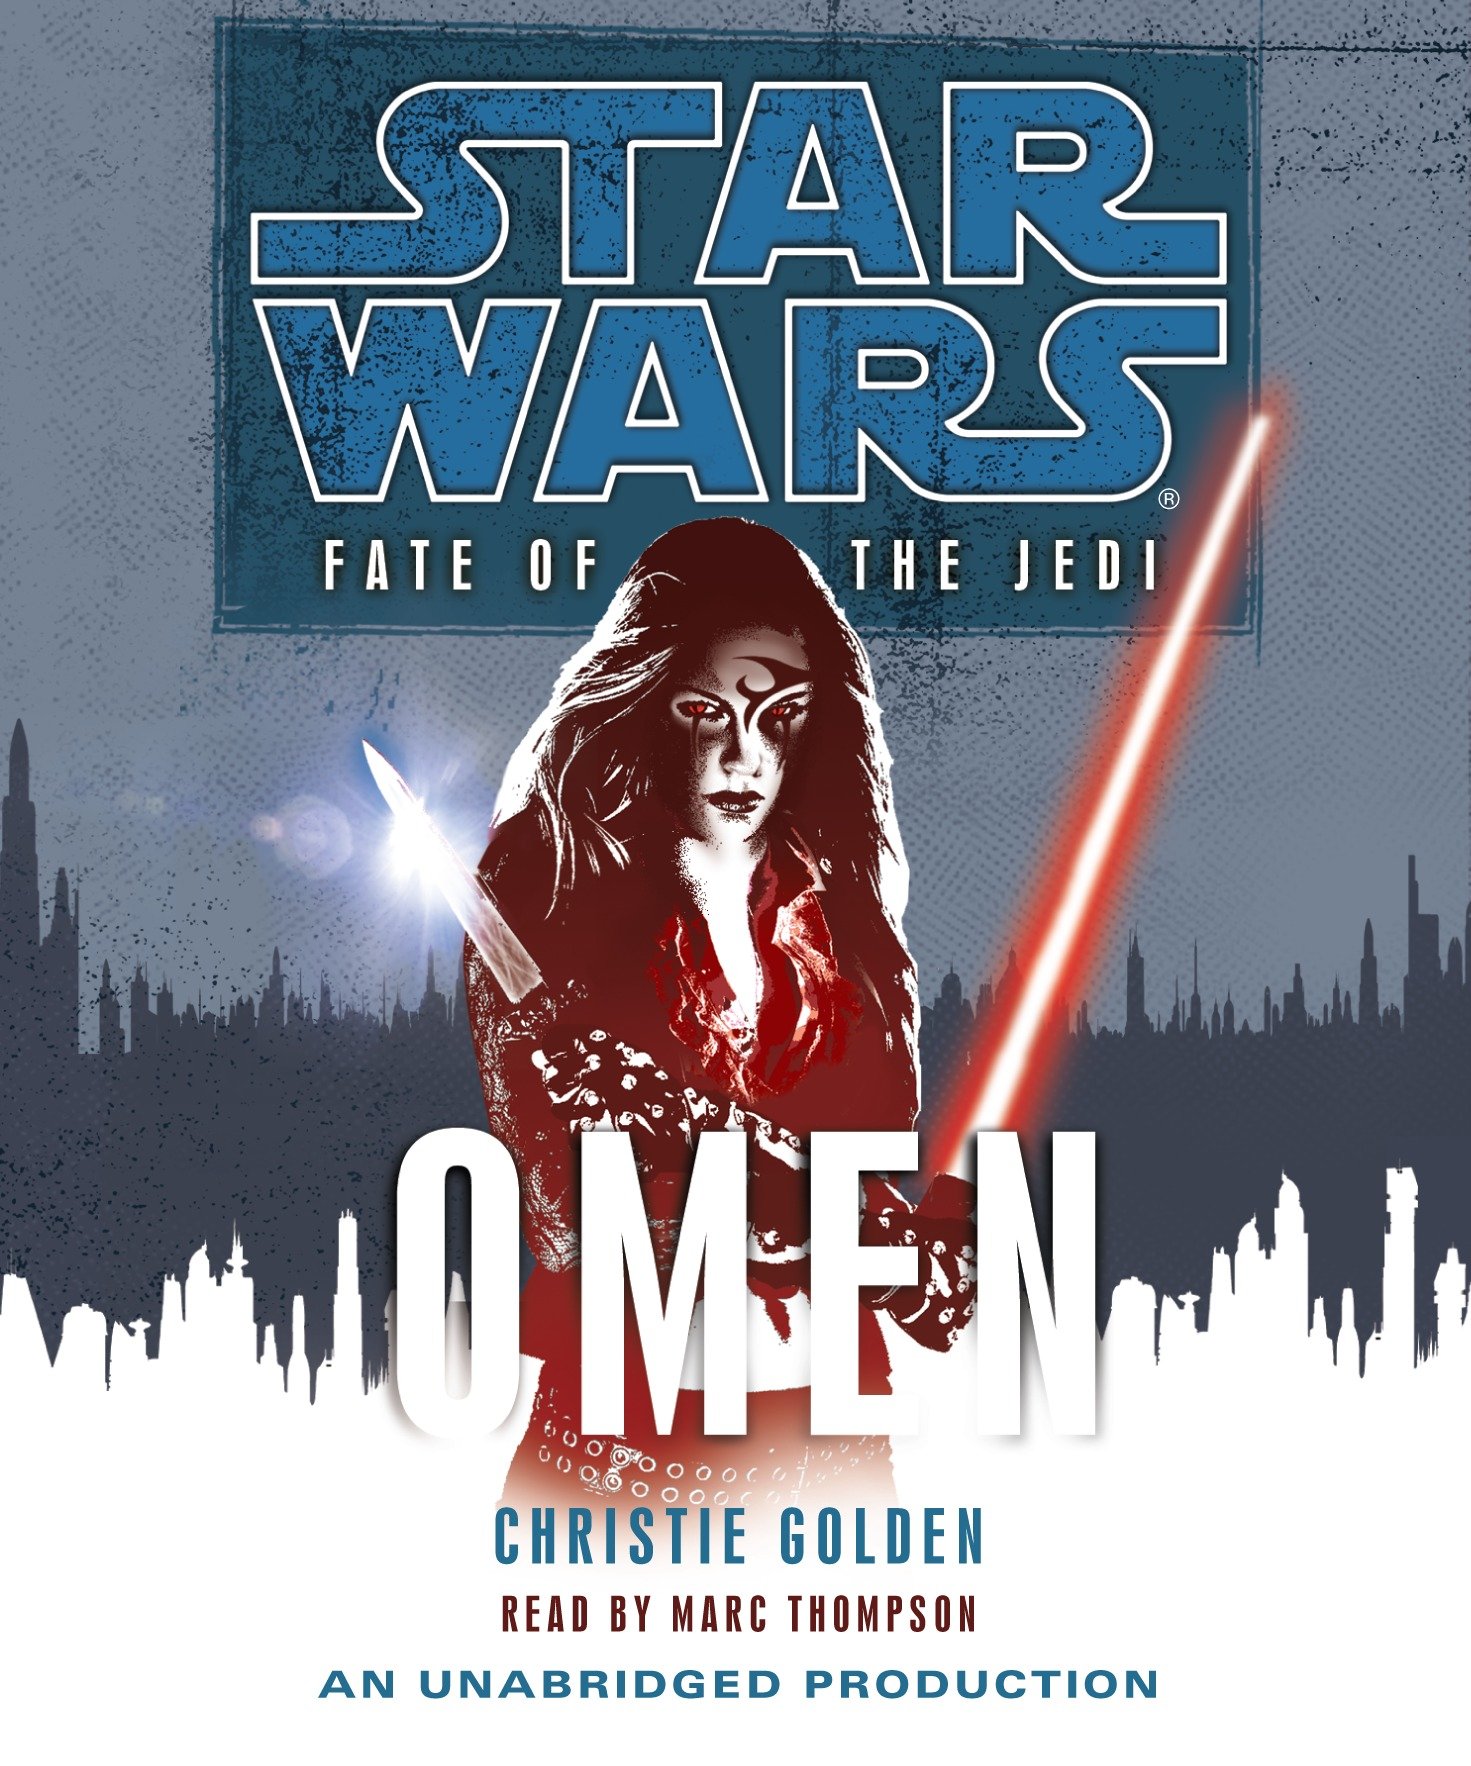 Fate of the Jedi by Christie Golden